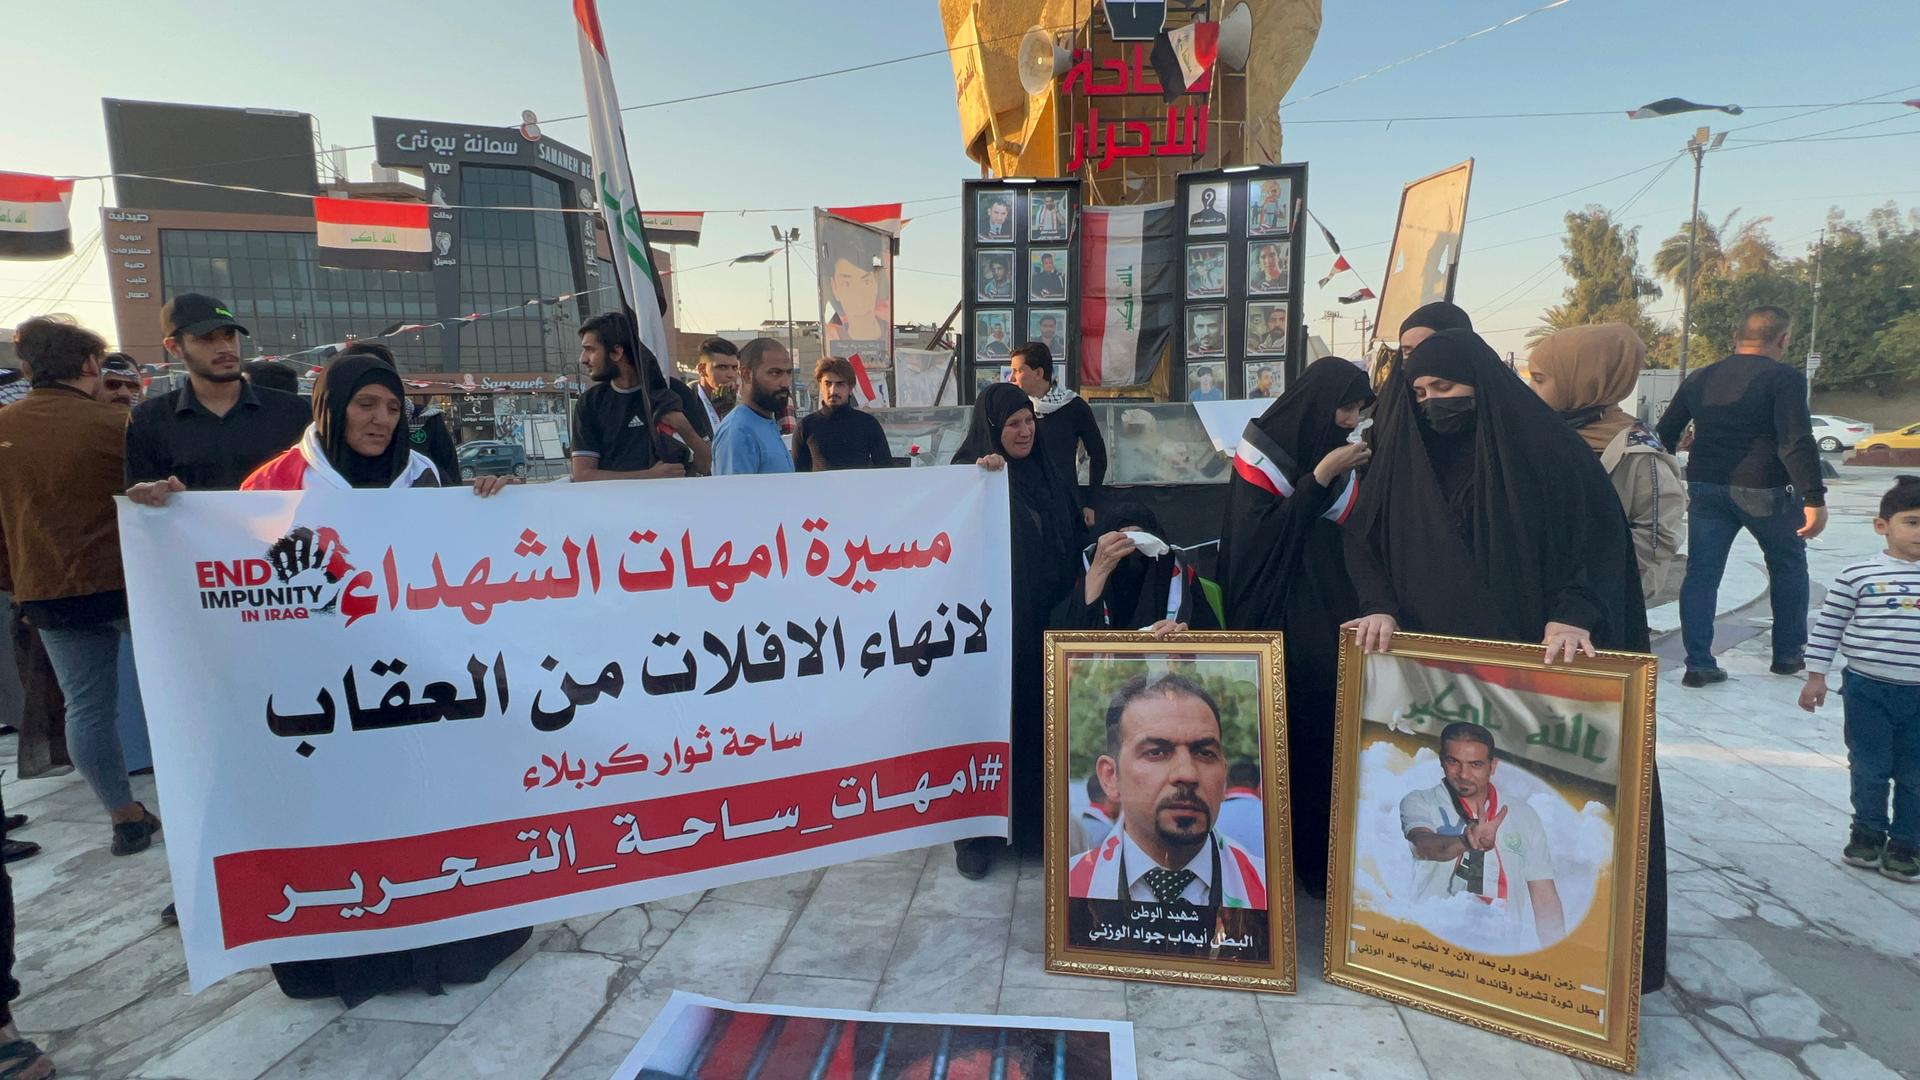 Samira Abbas, whose activist son Ehab al-Wazni was assassinated in May, attends a demonstration in Karbala on Nov. 18, 2021, with other women protesting the impunity Iraqi activists face.